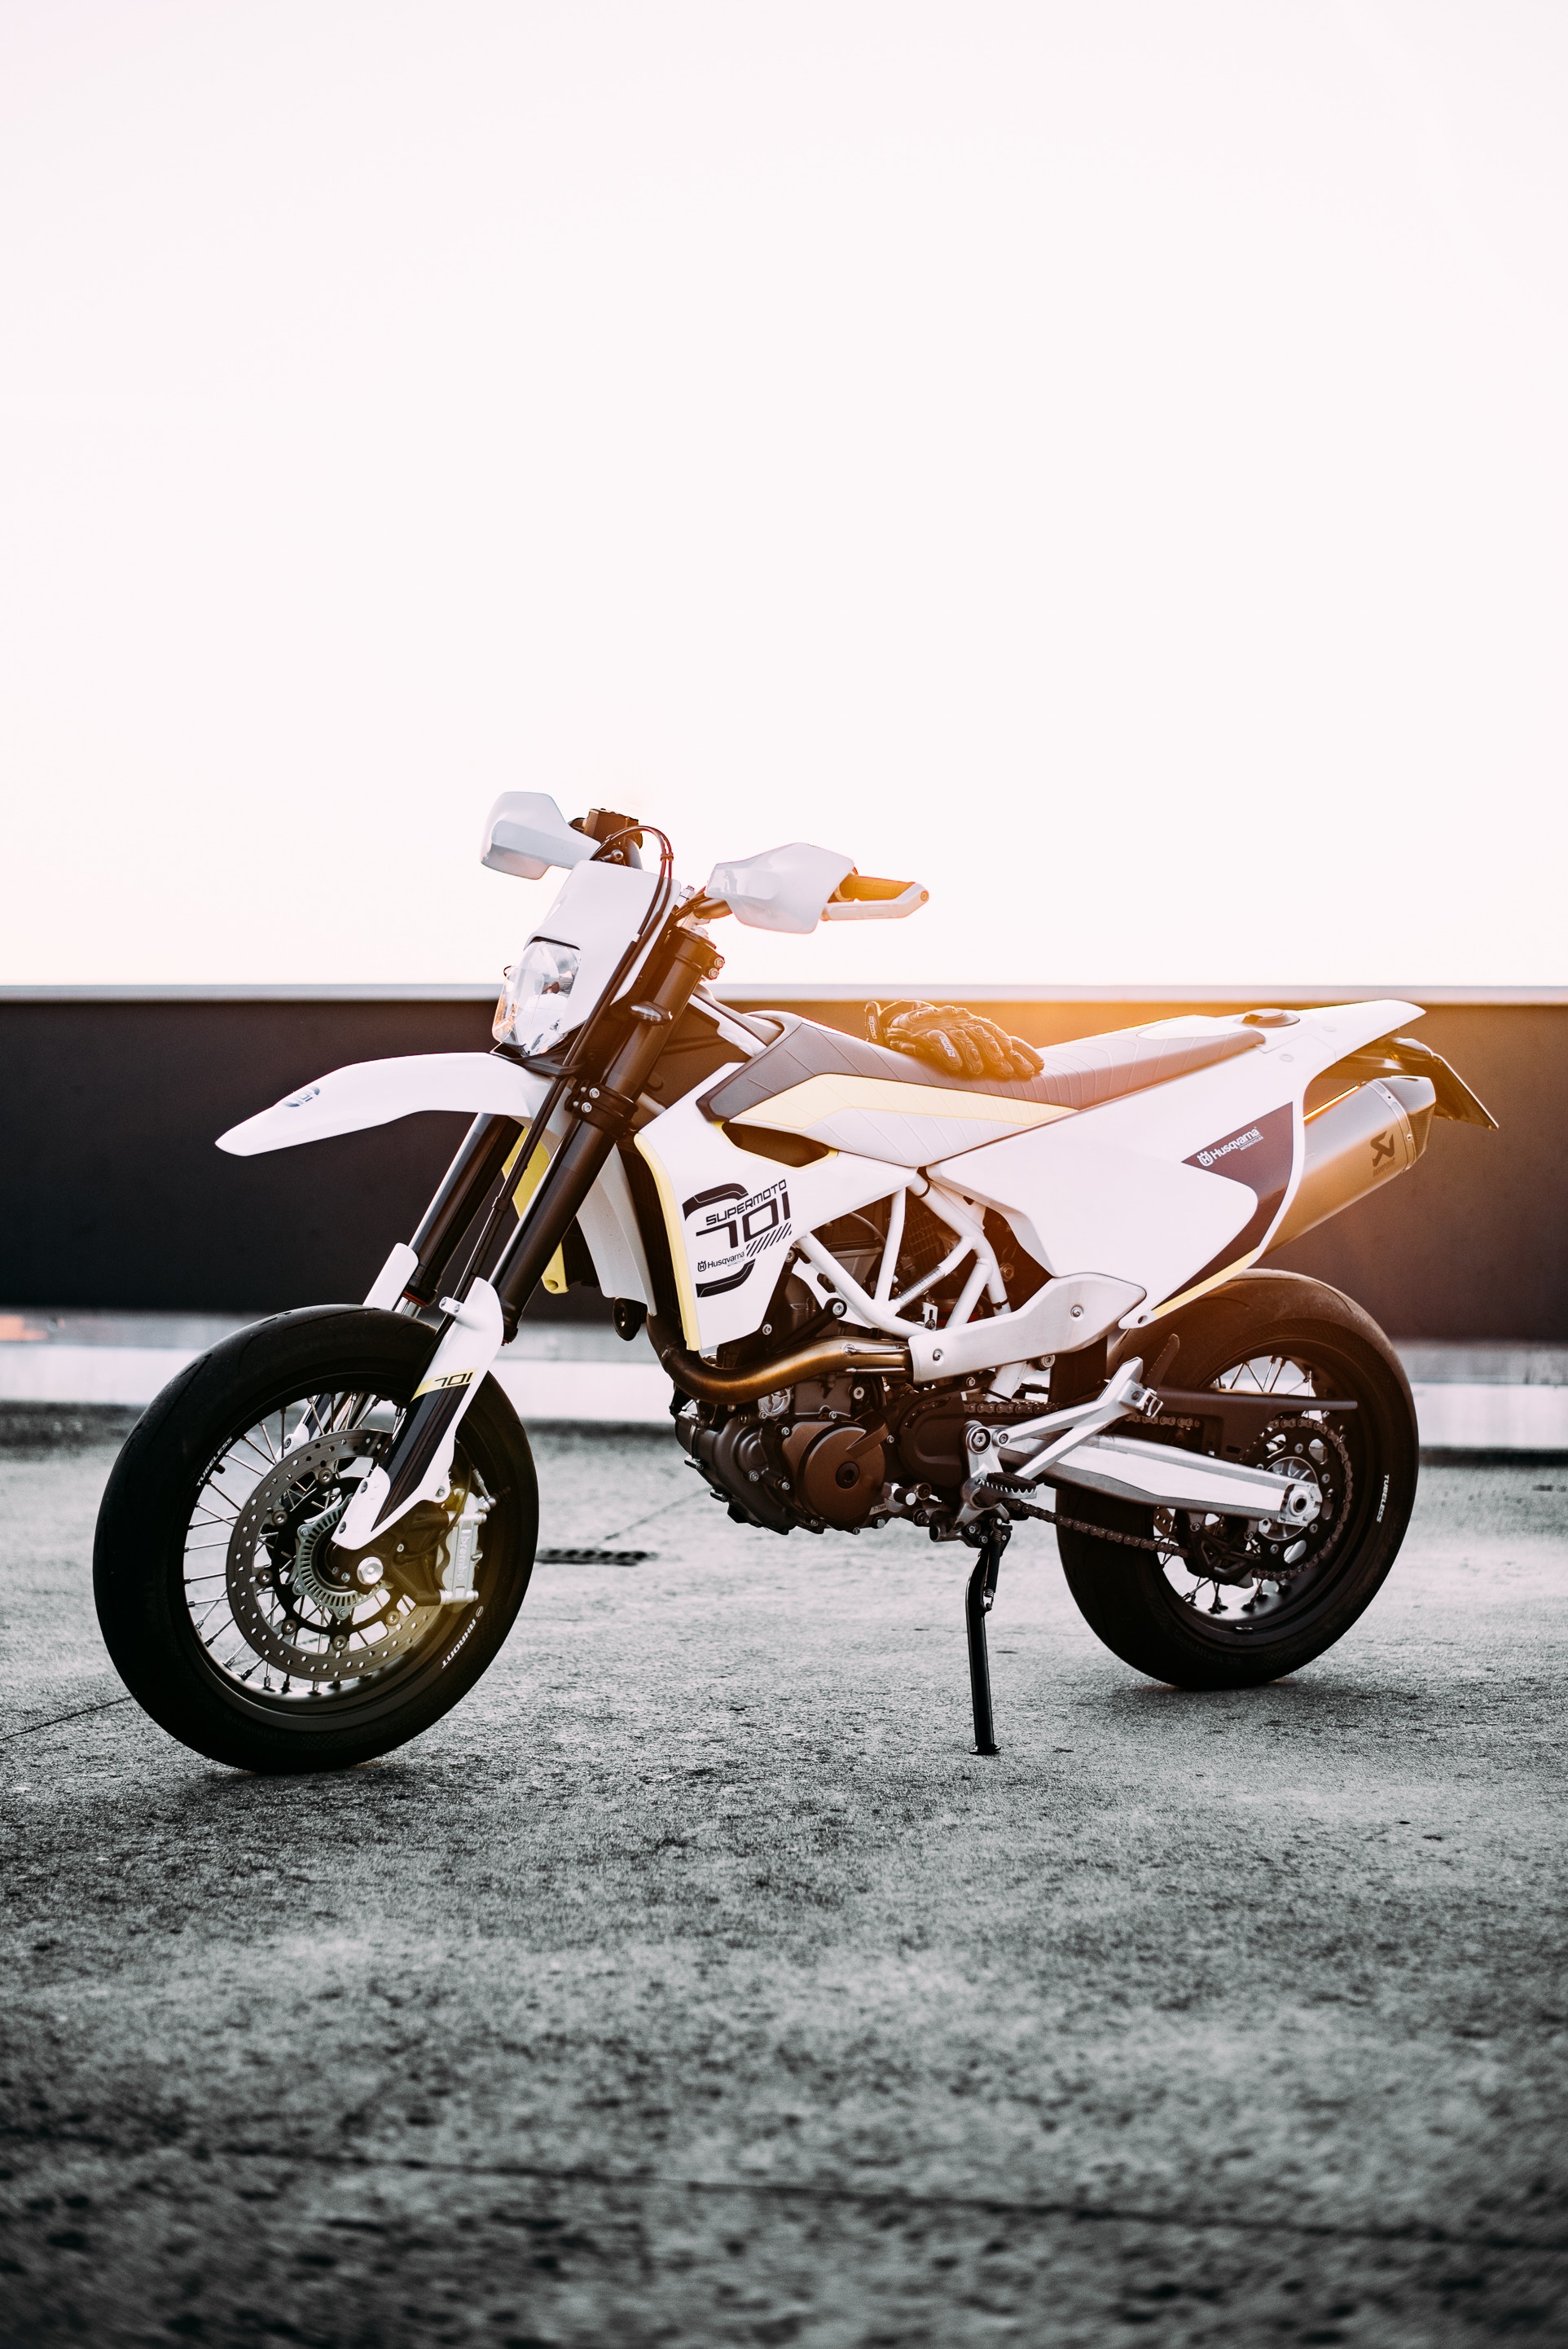 side view, motorcycles, white, motorcycle